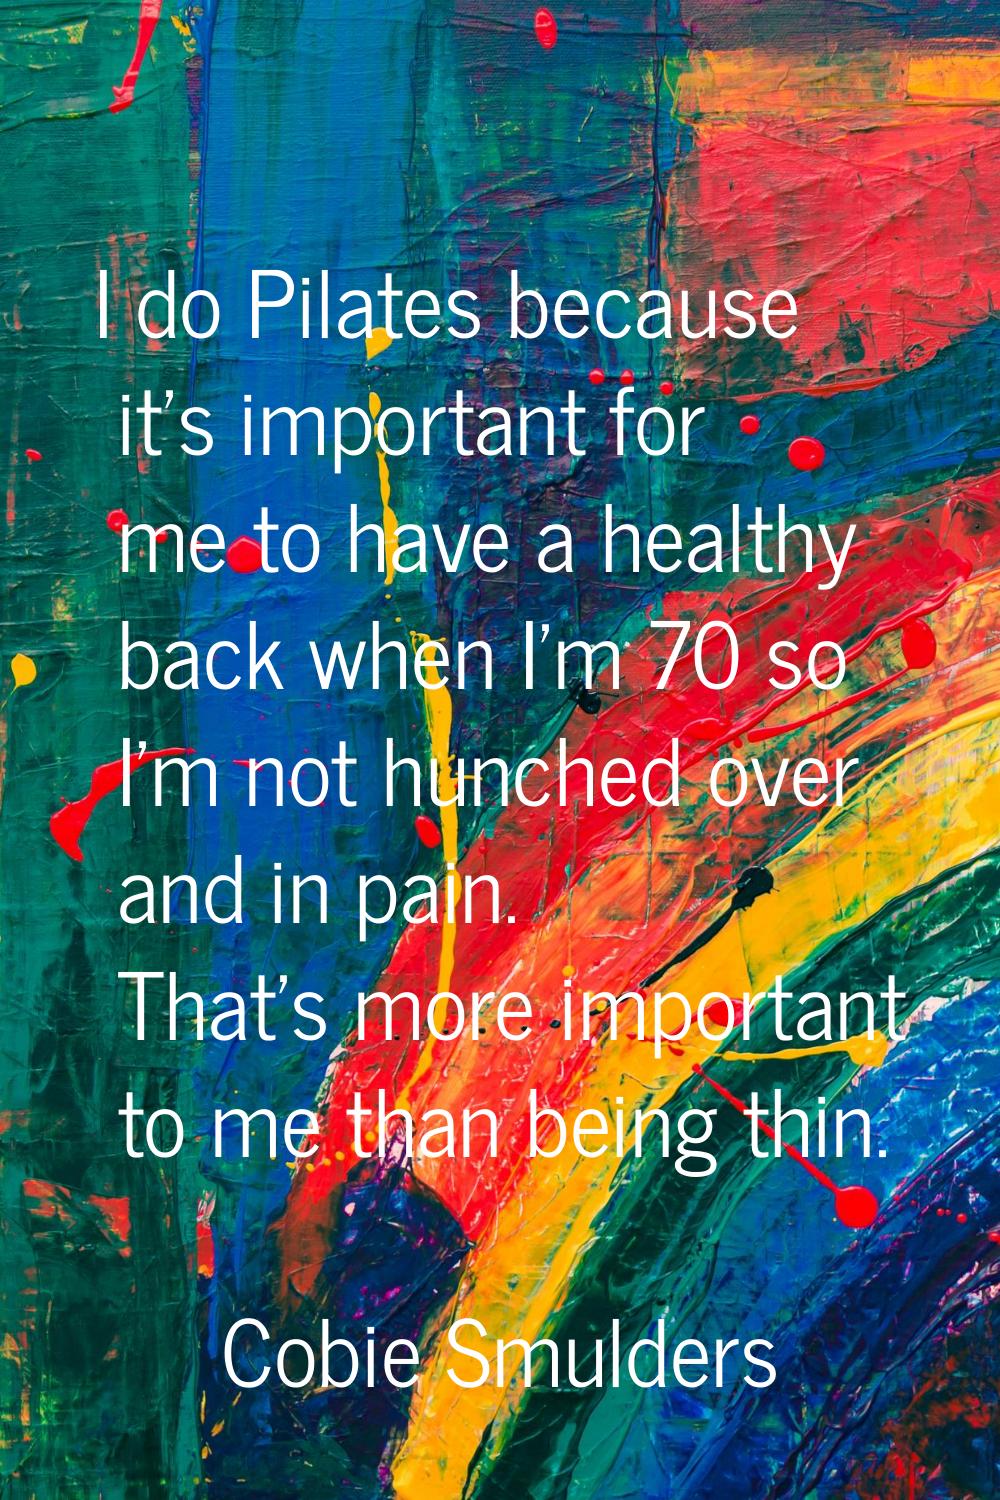 I do Pilates because it's important for me to have a healthy back when I'm 70 so I'm not hunched ov